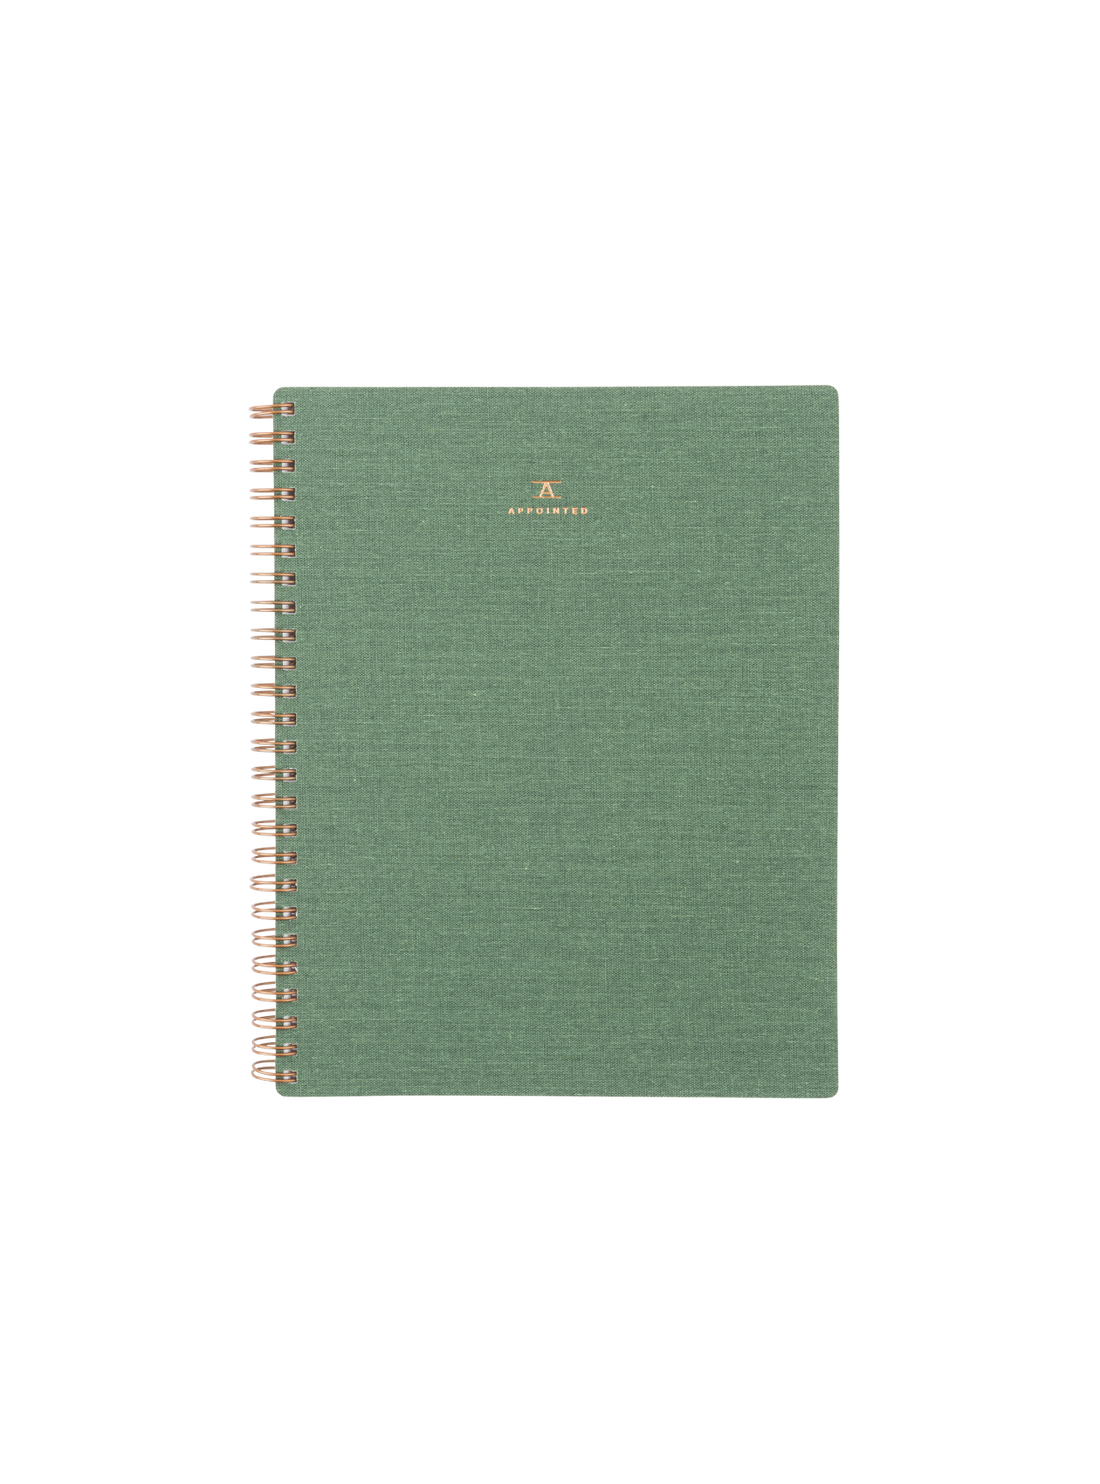 The  Appointed Workbook - Fern Green